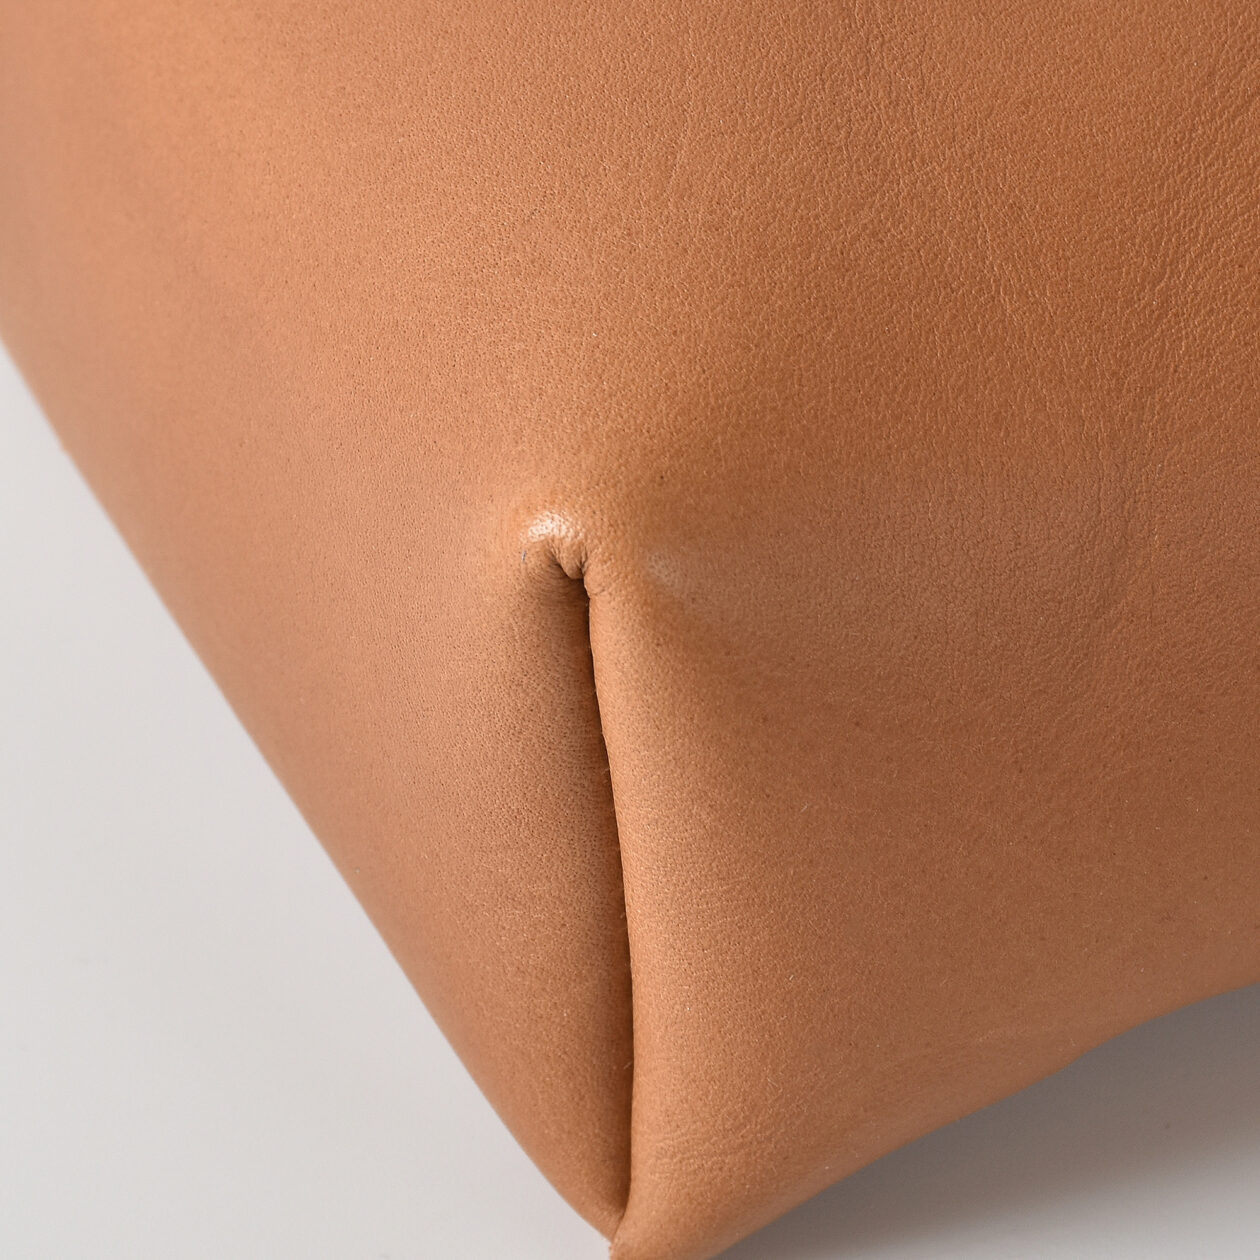 TISSUE COVER oiled leather brown detail